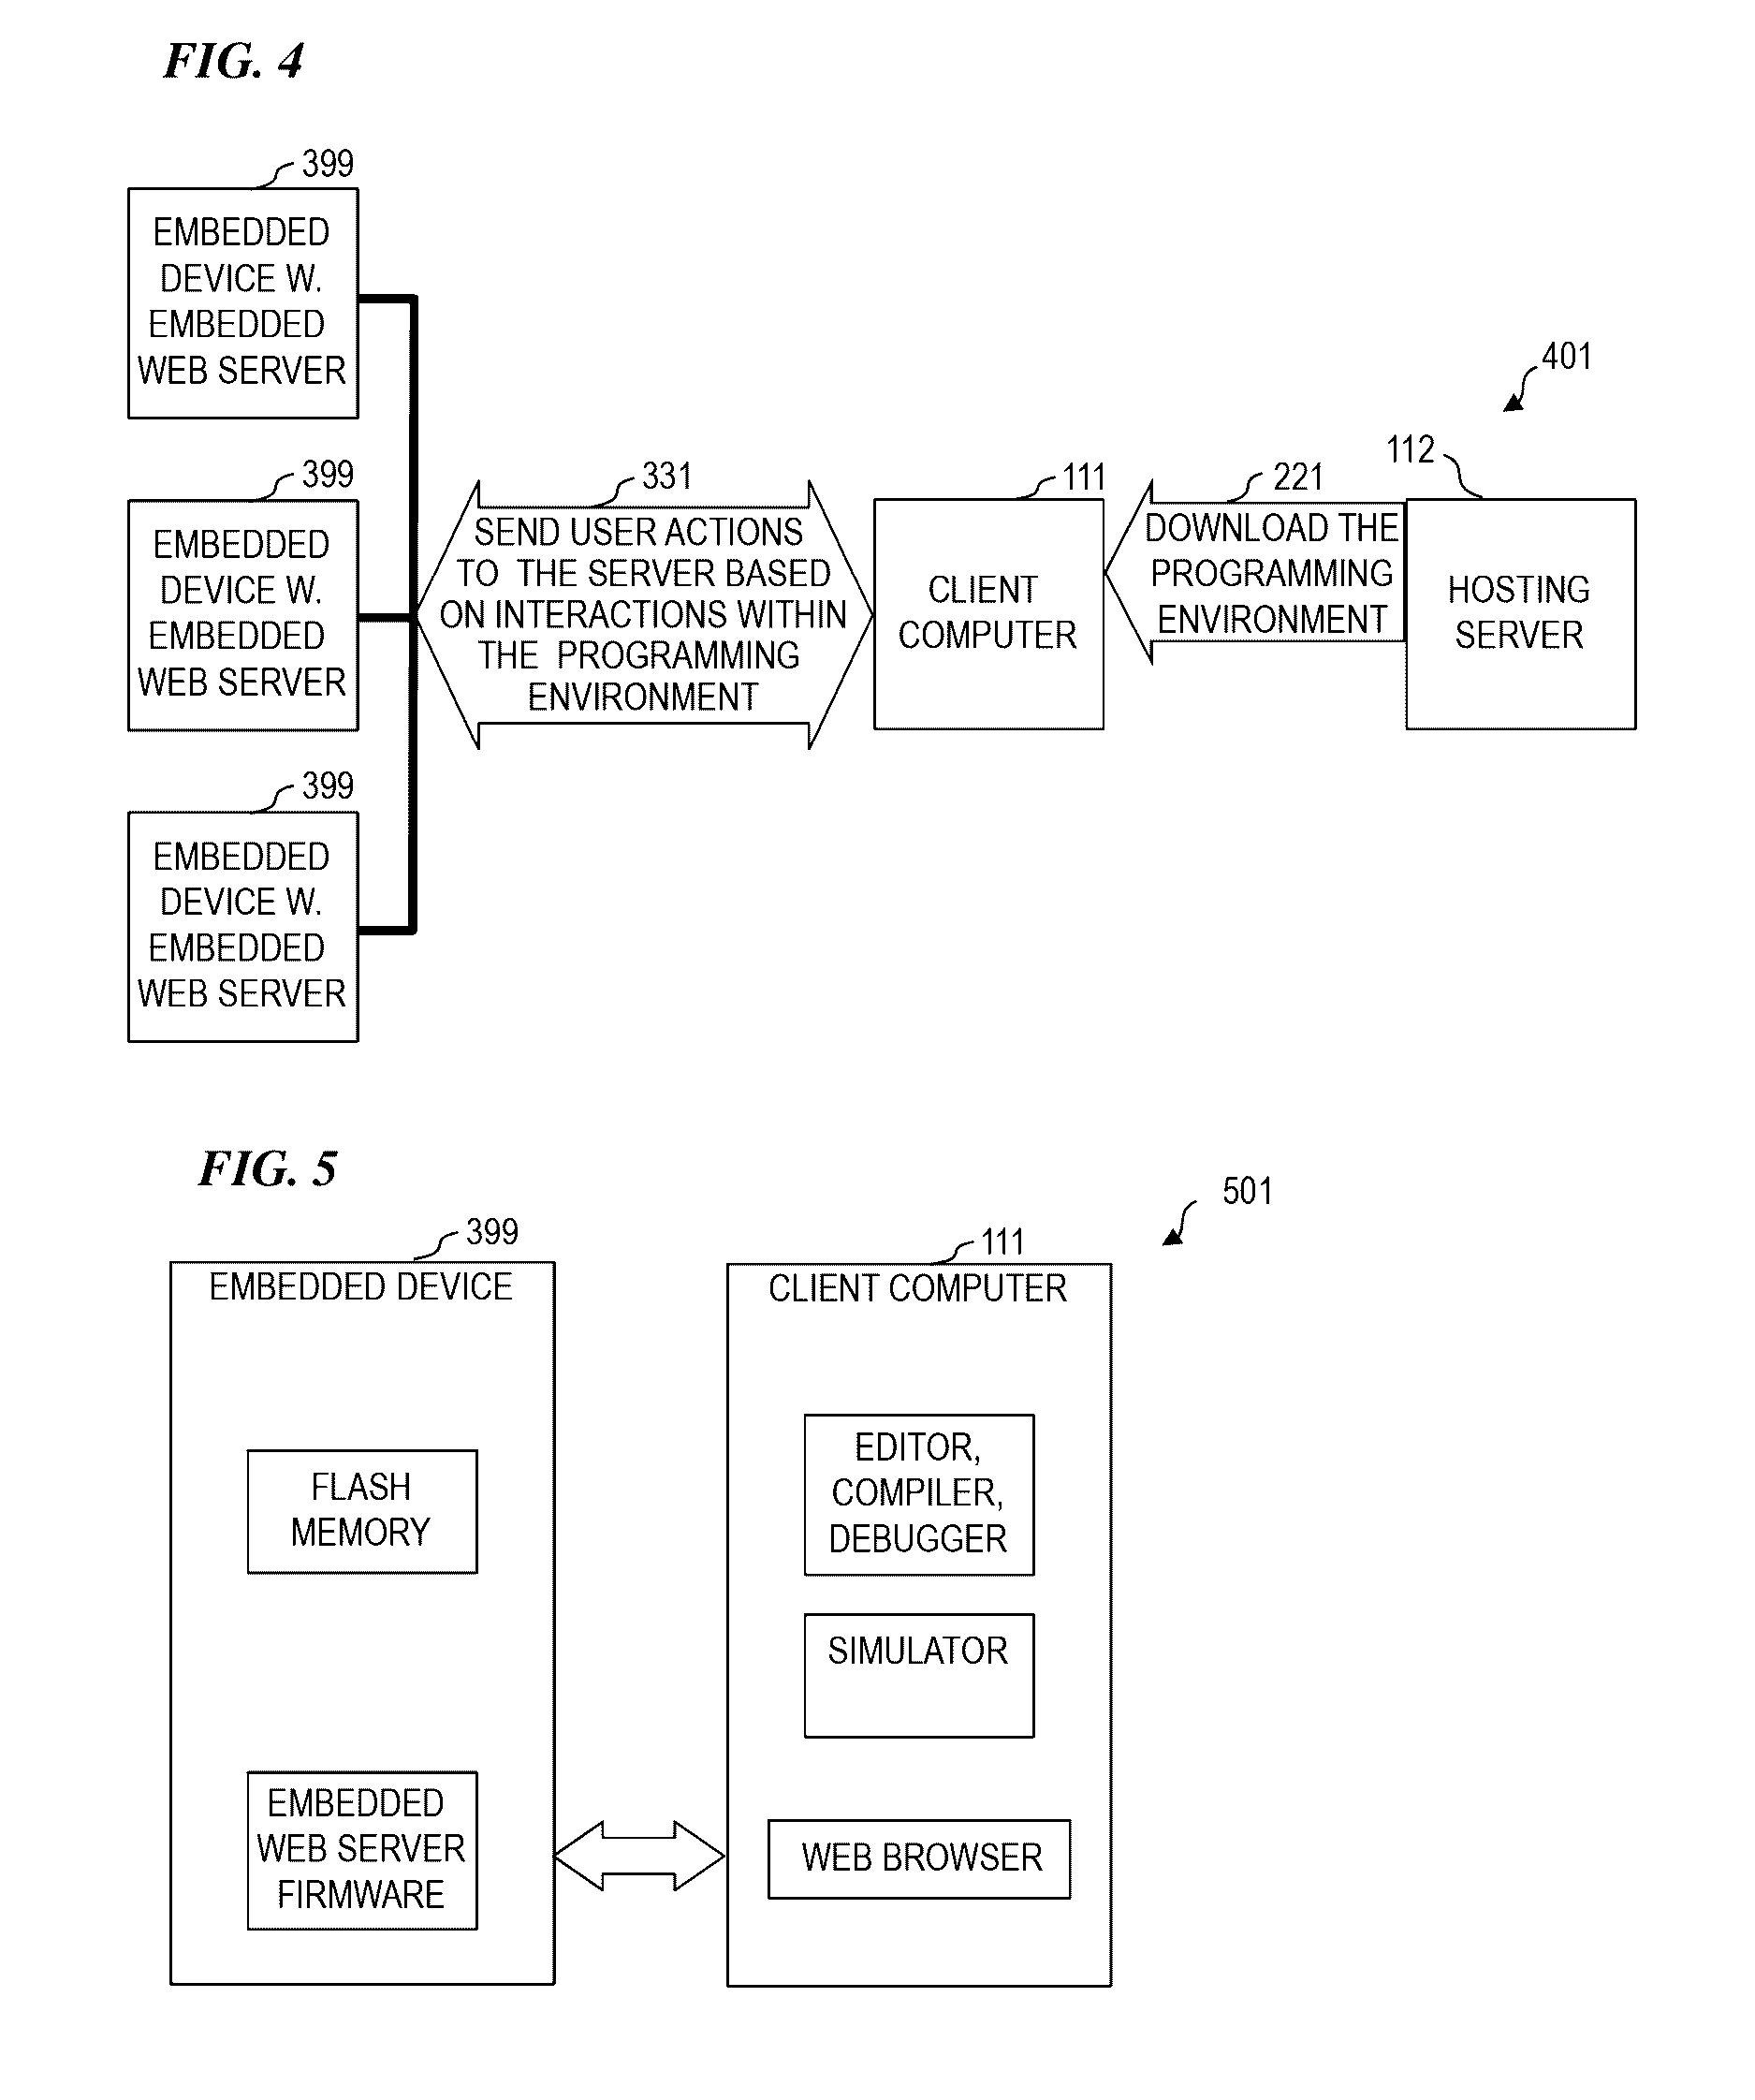 Web-Based Programming Environment for Embedded Devices